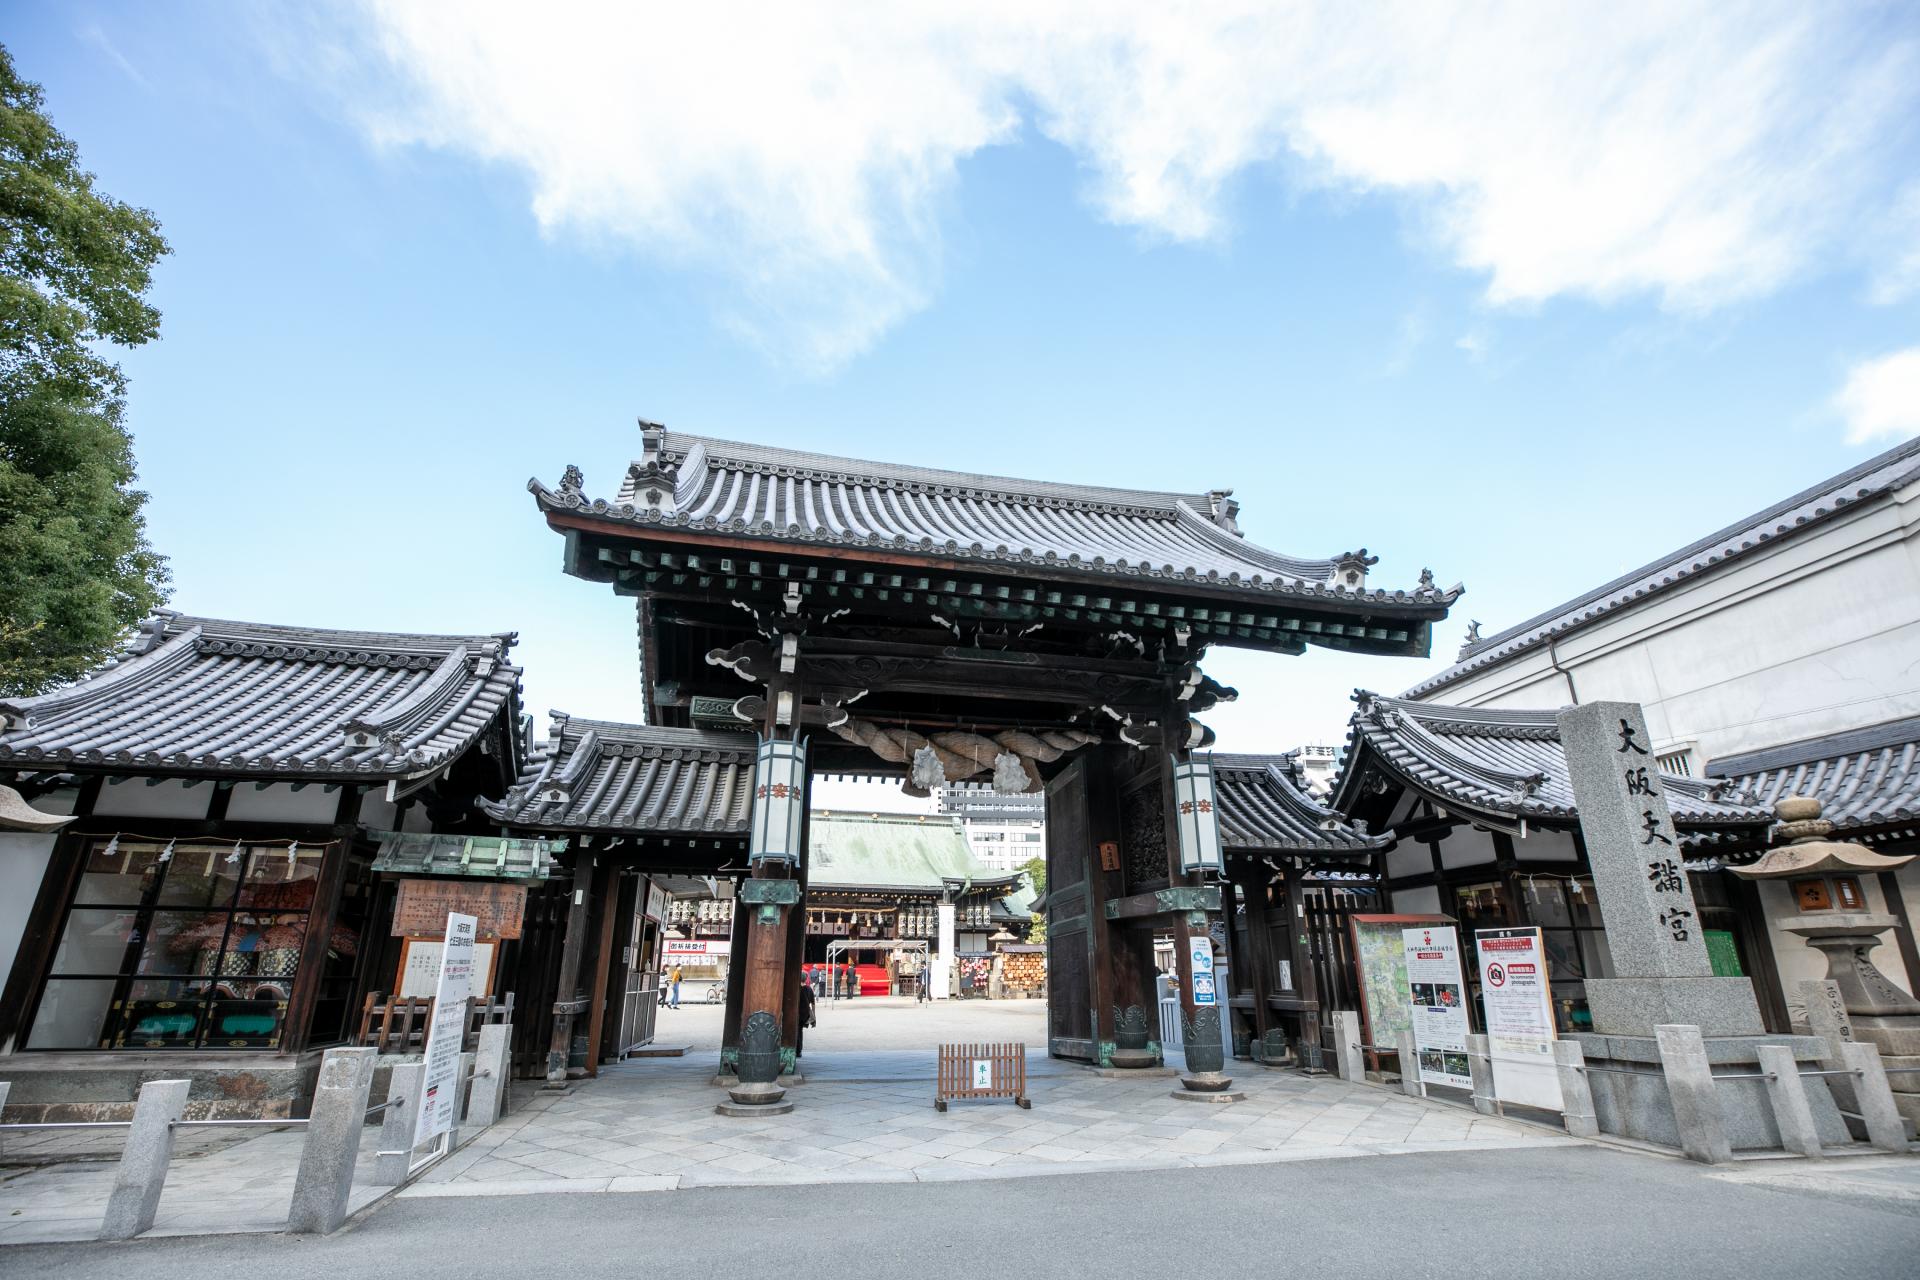 Nestled in downtown Osaka, the shrine attracts many worshippers and holds a special place in the hearts of Osaka locals.